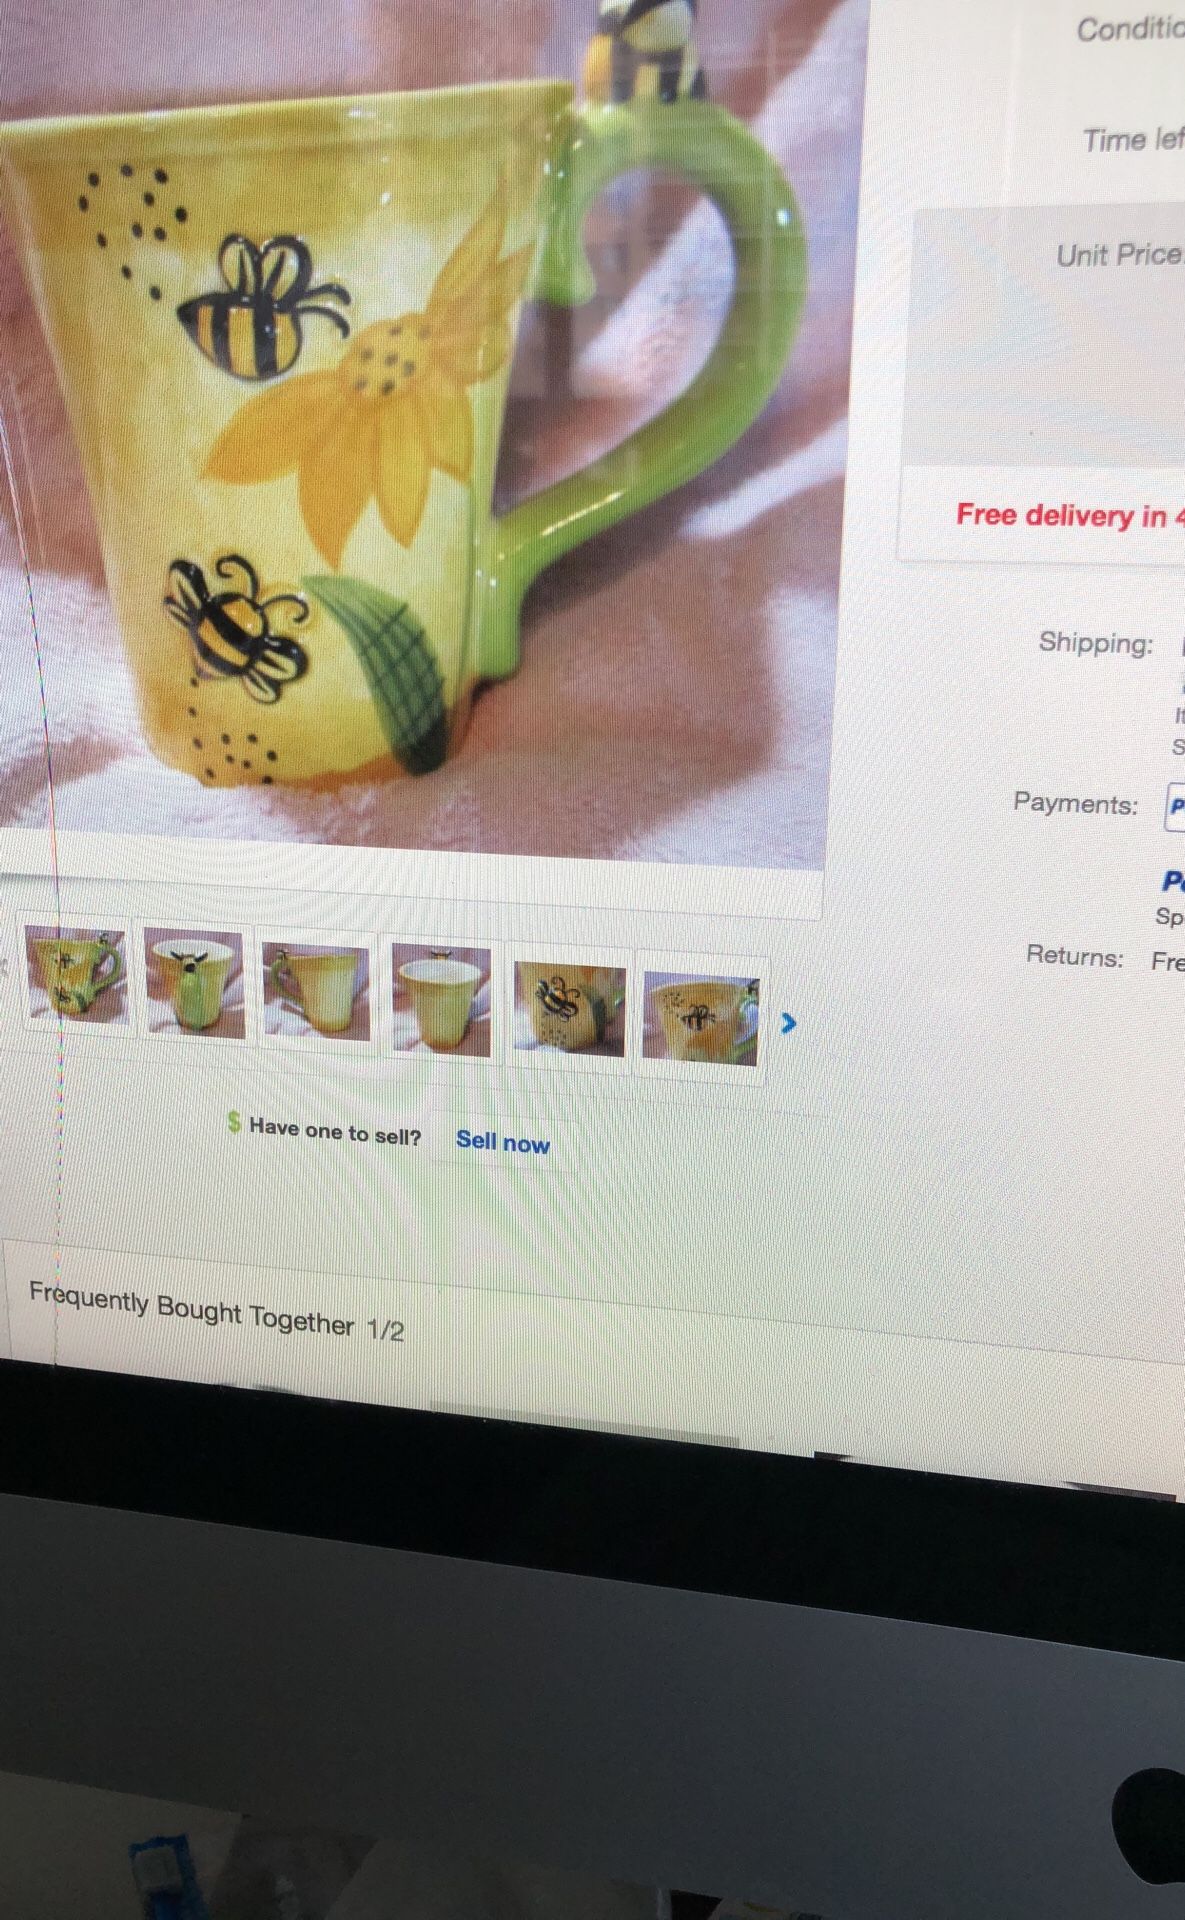 One Coffee Mug. Please see all the pictures and read the description